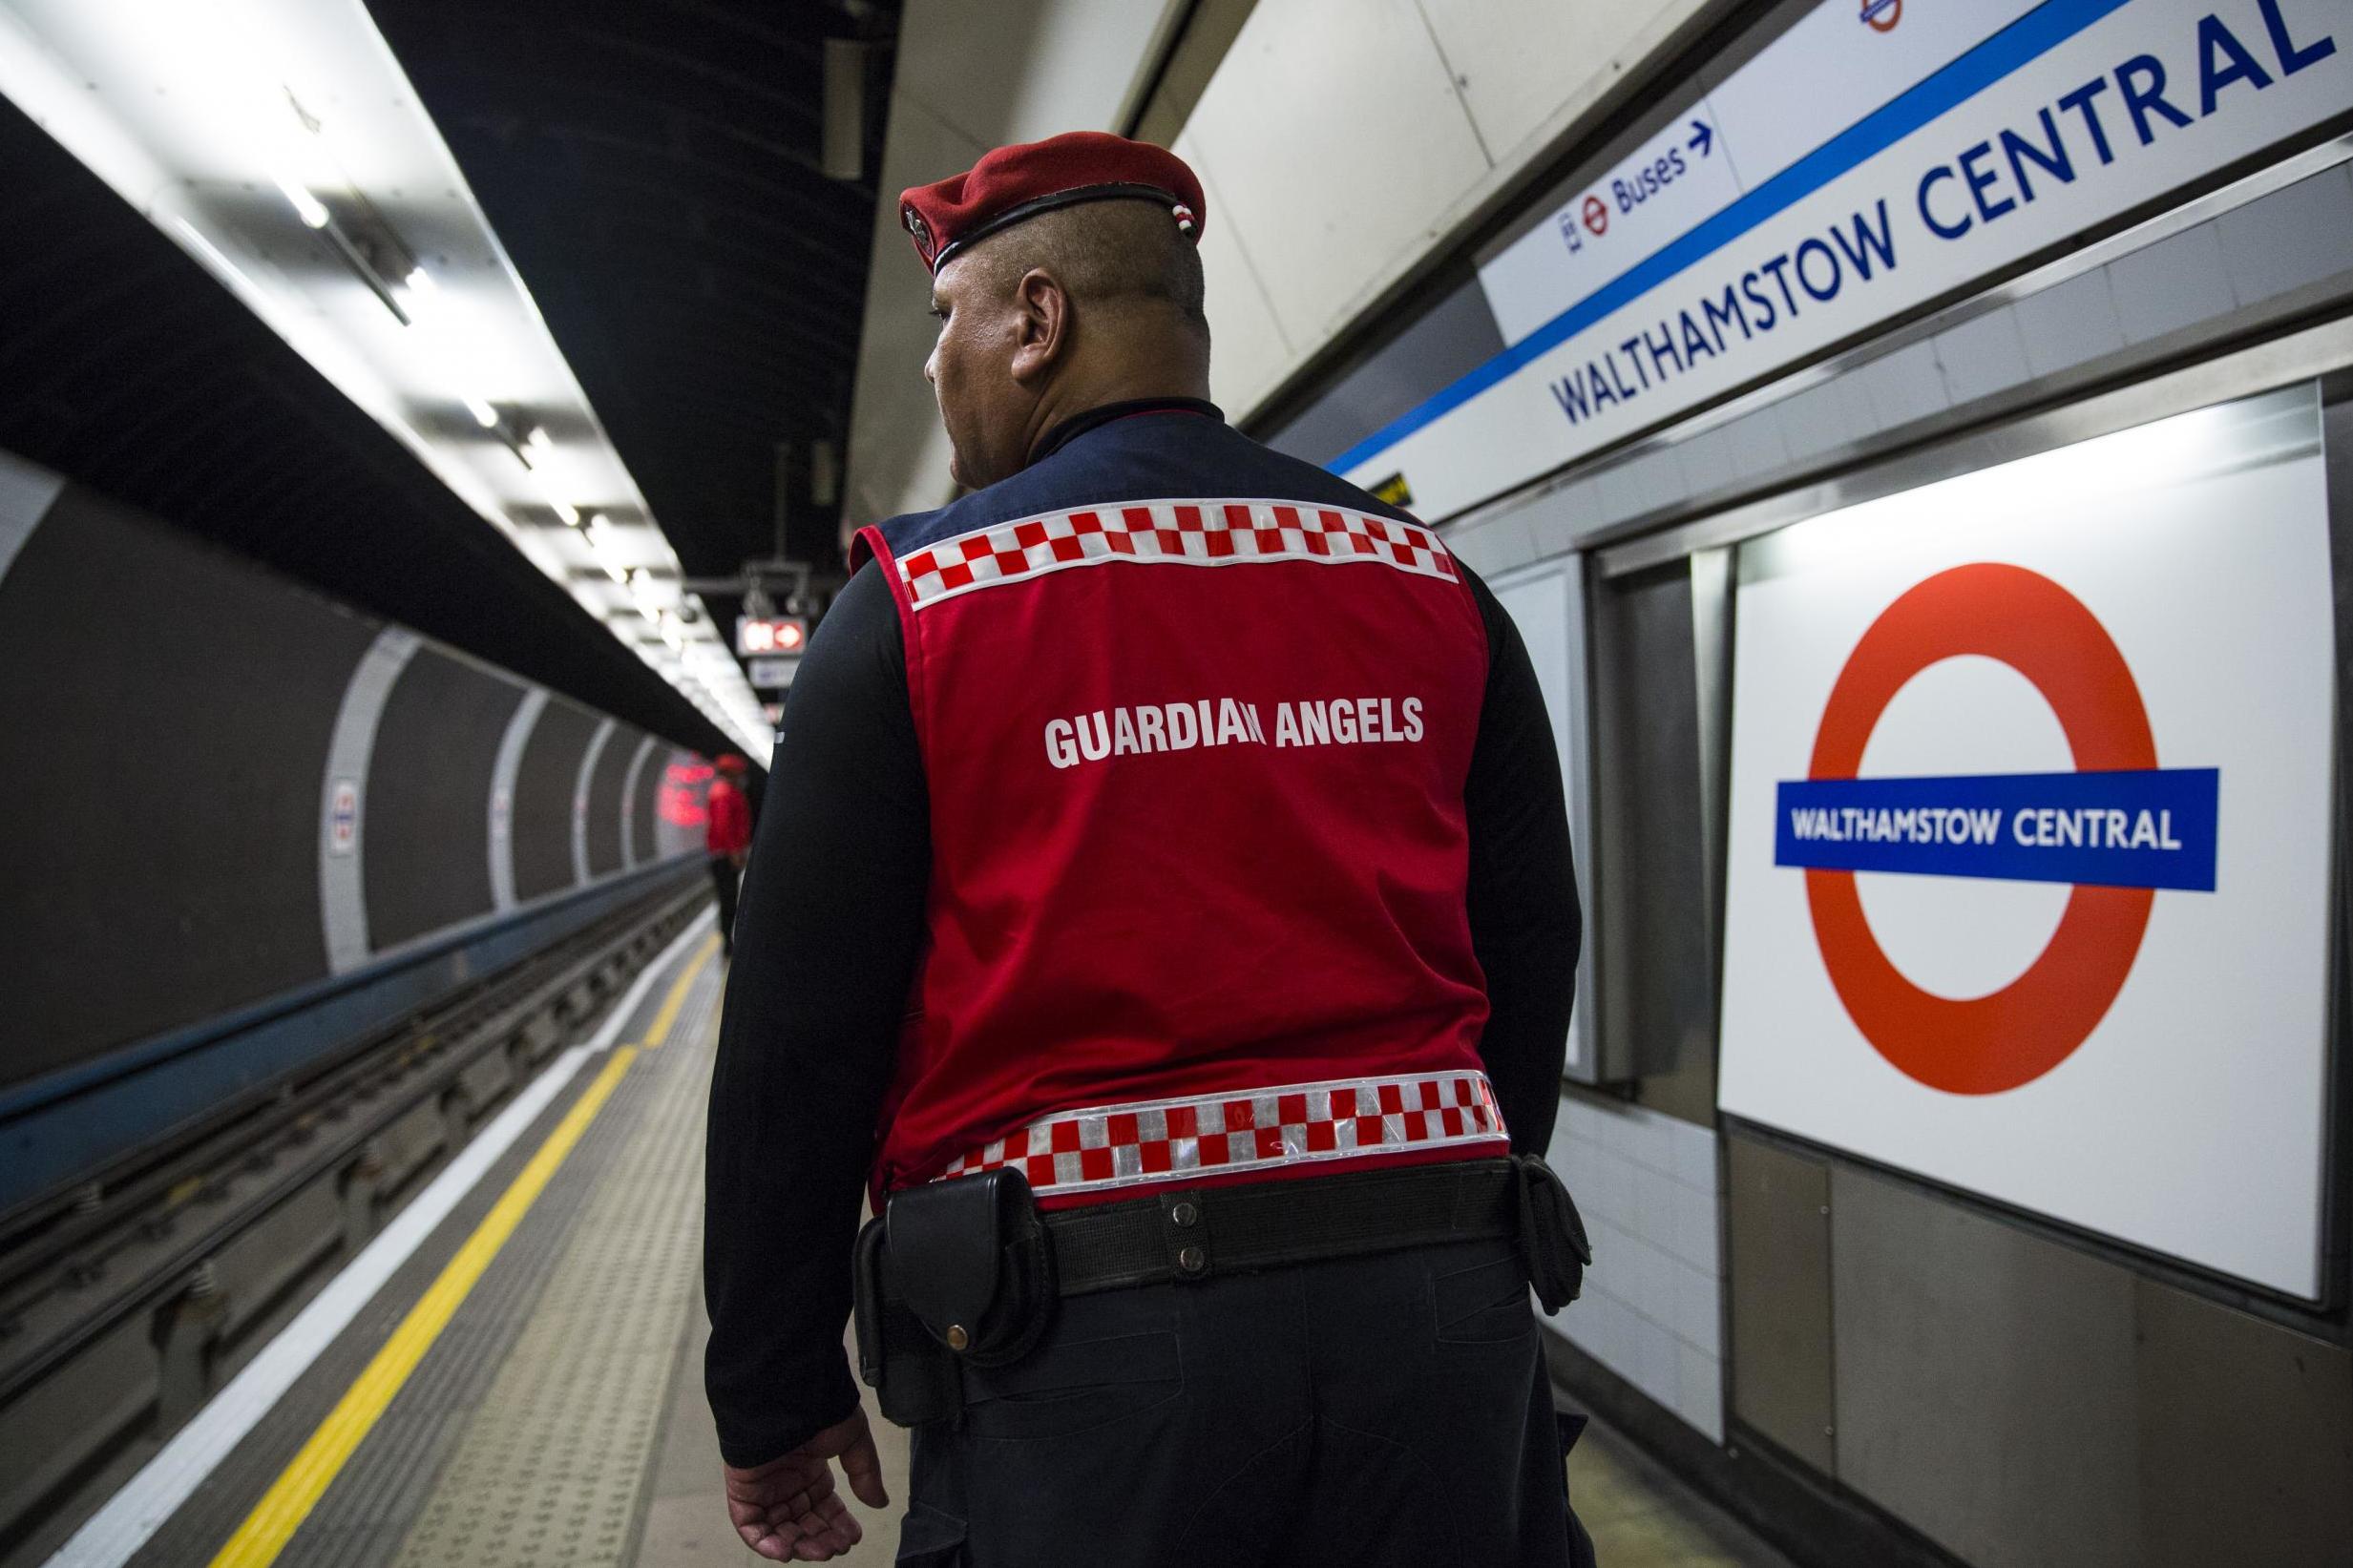 Guardian Angels membership is on the rise again